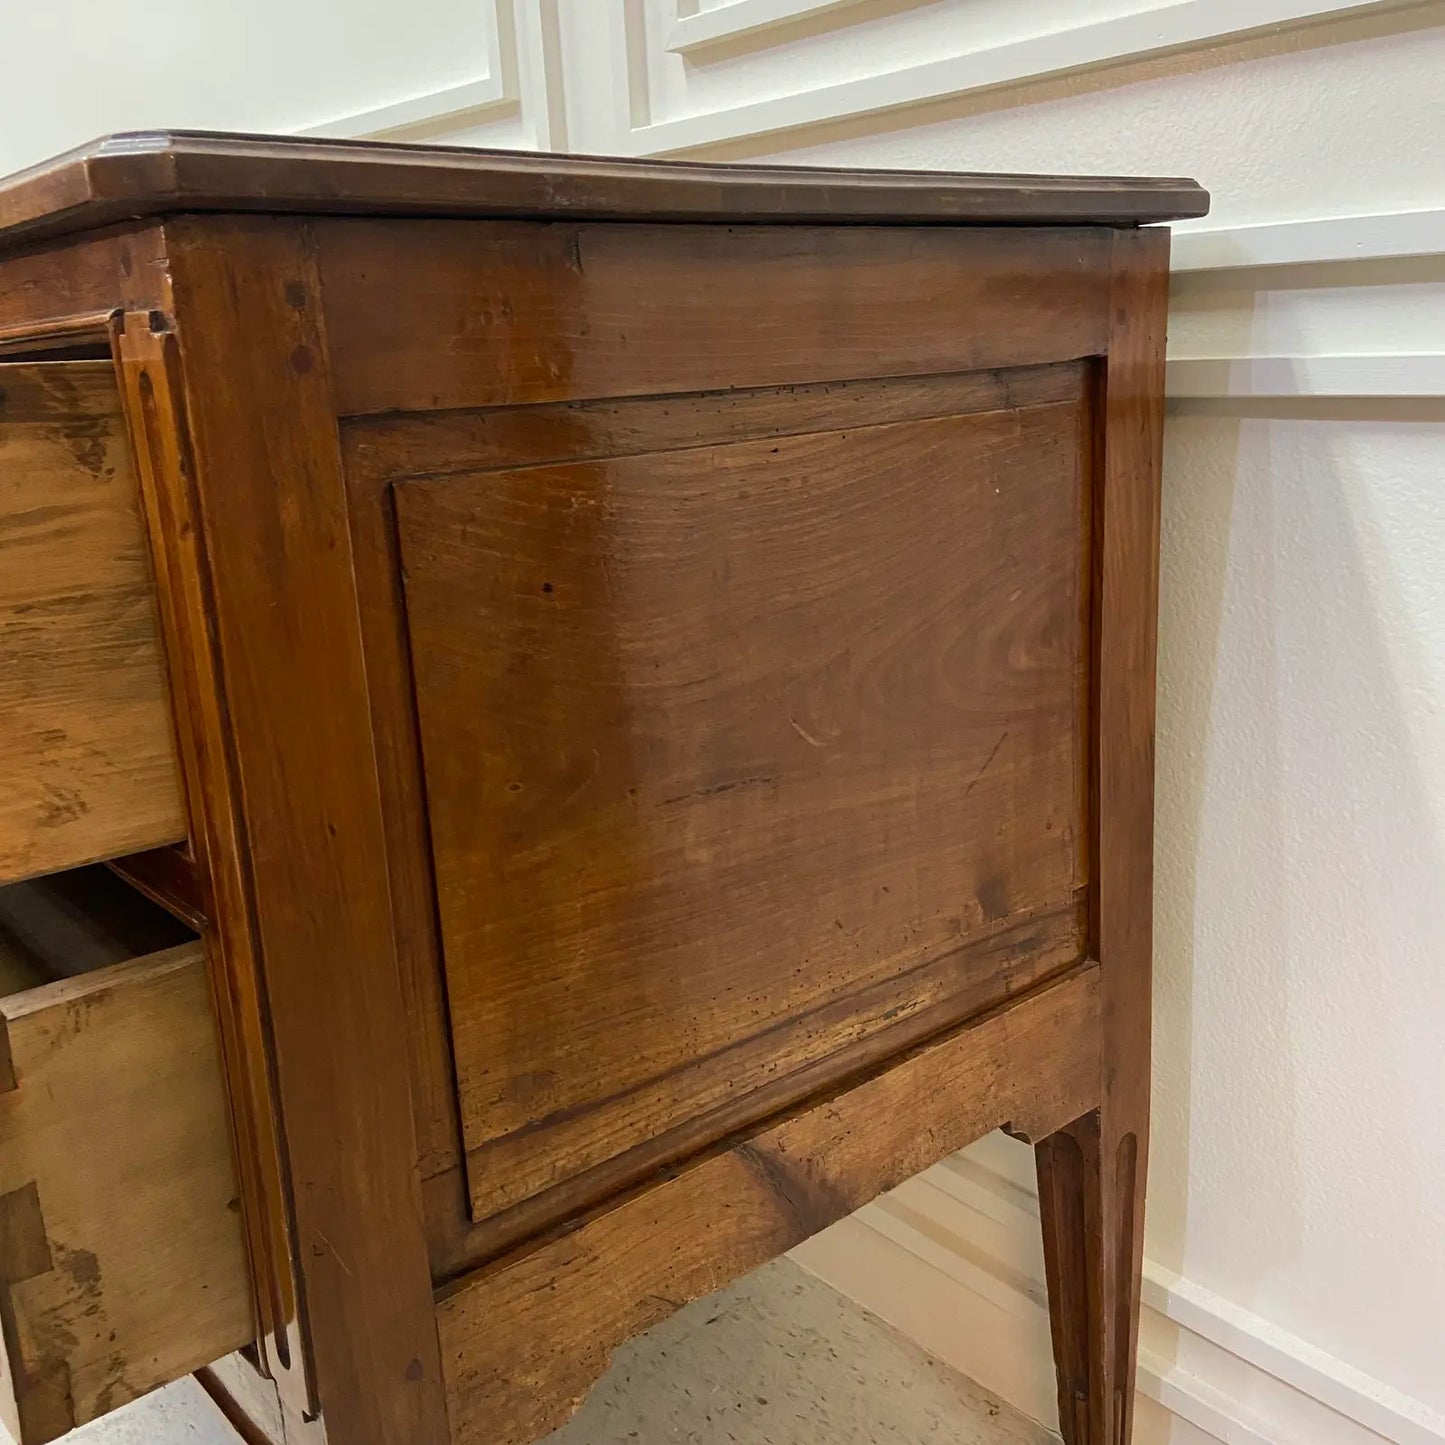 1780 FRENCH CHERRY WOOD COMMODE SAUTEUSE WITH LOCK